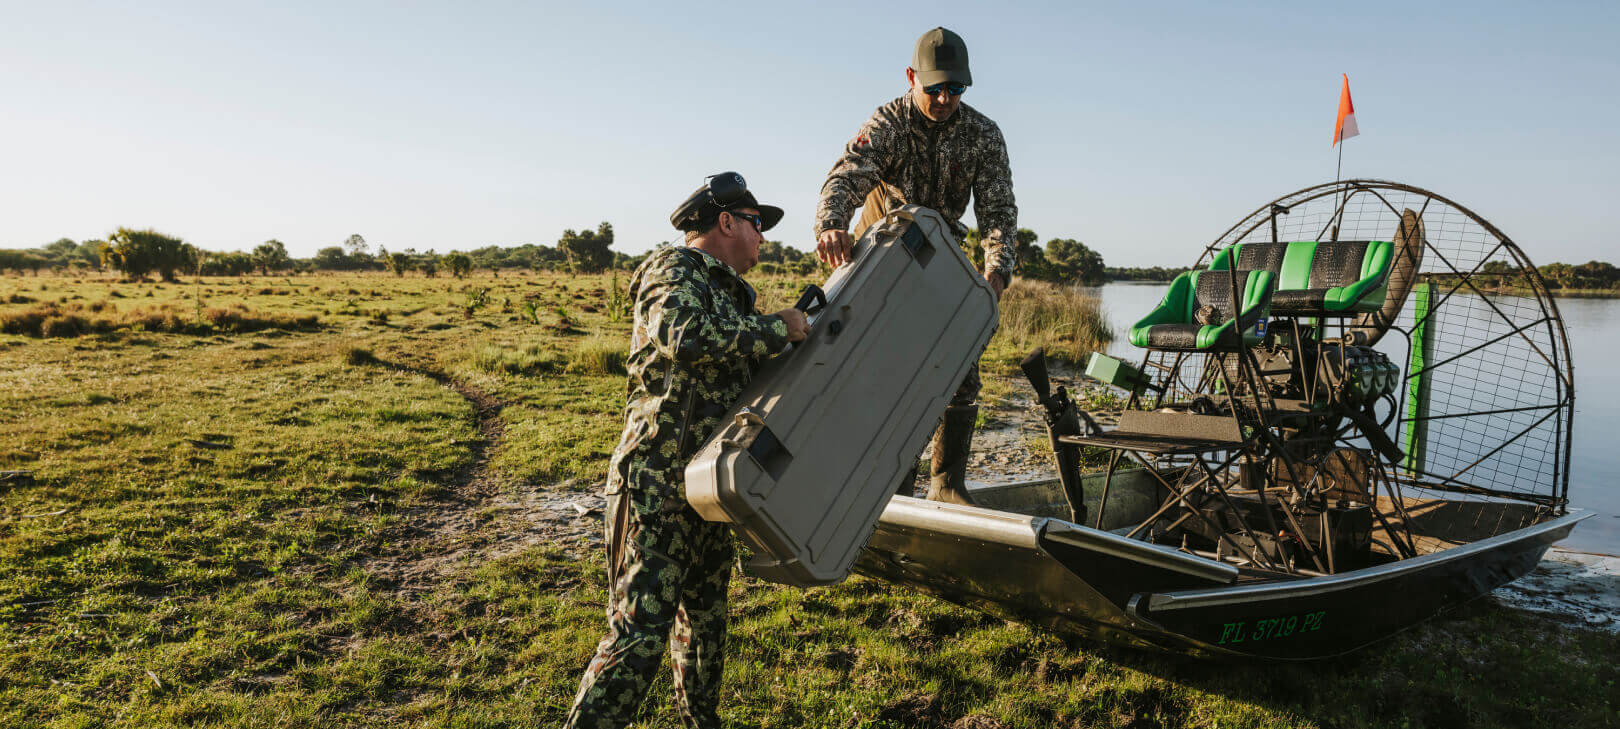 Two men loading a tan Minuteman into their airboat